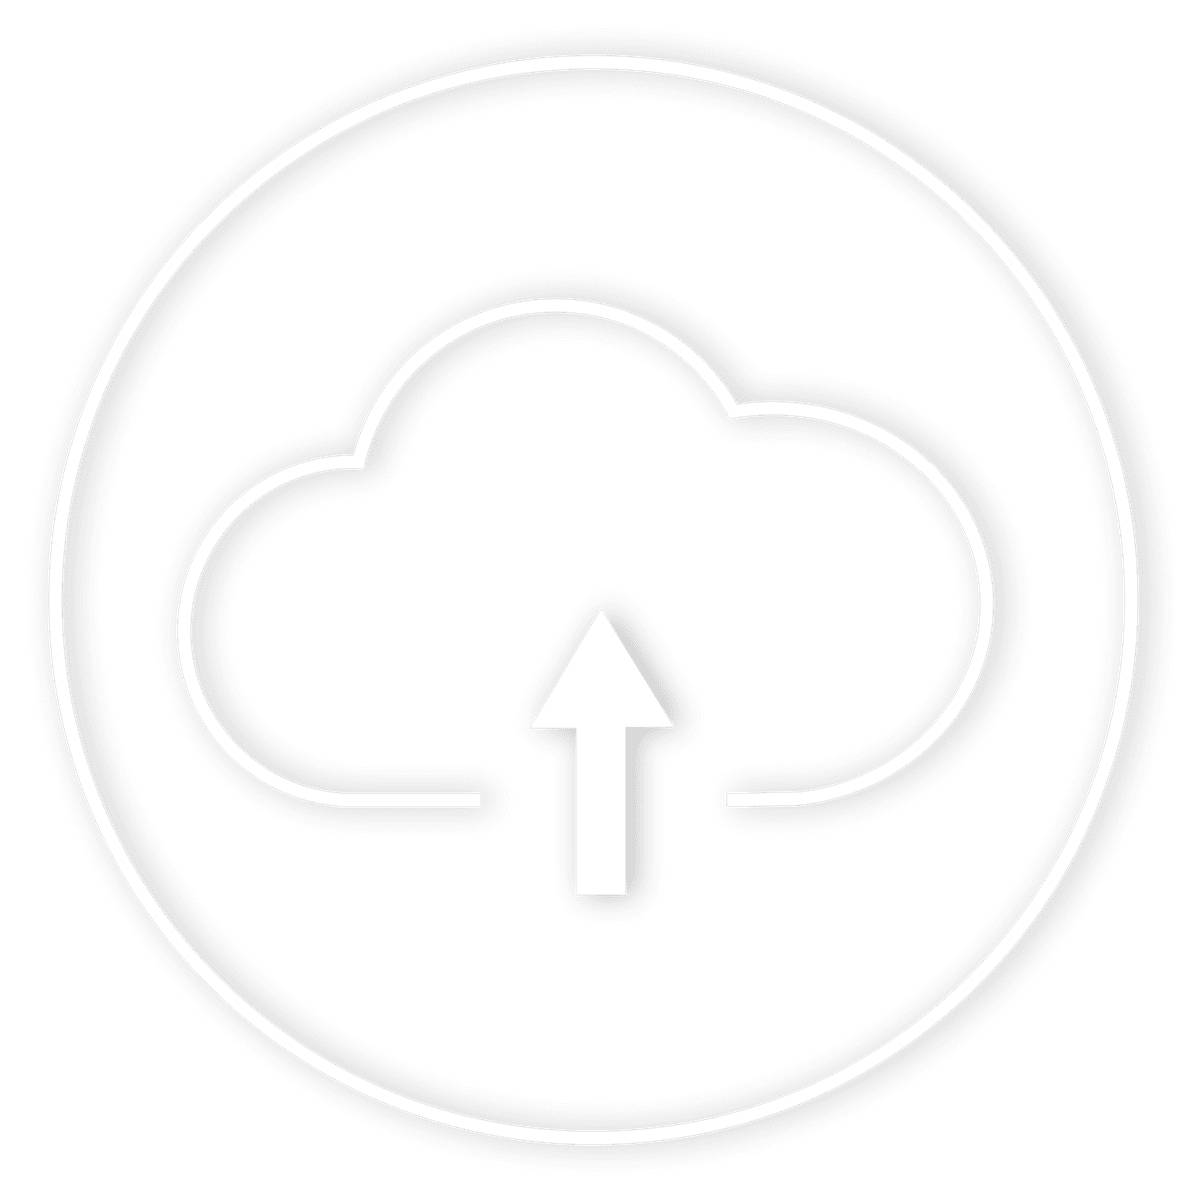 Data backup to the cloud